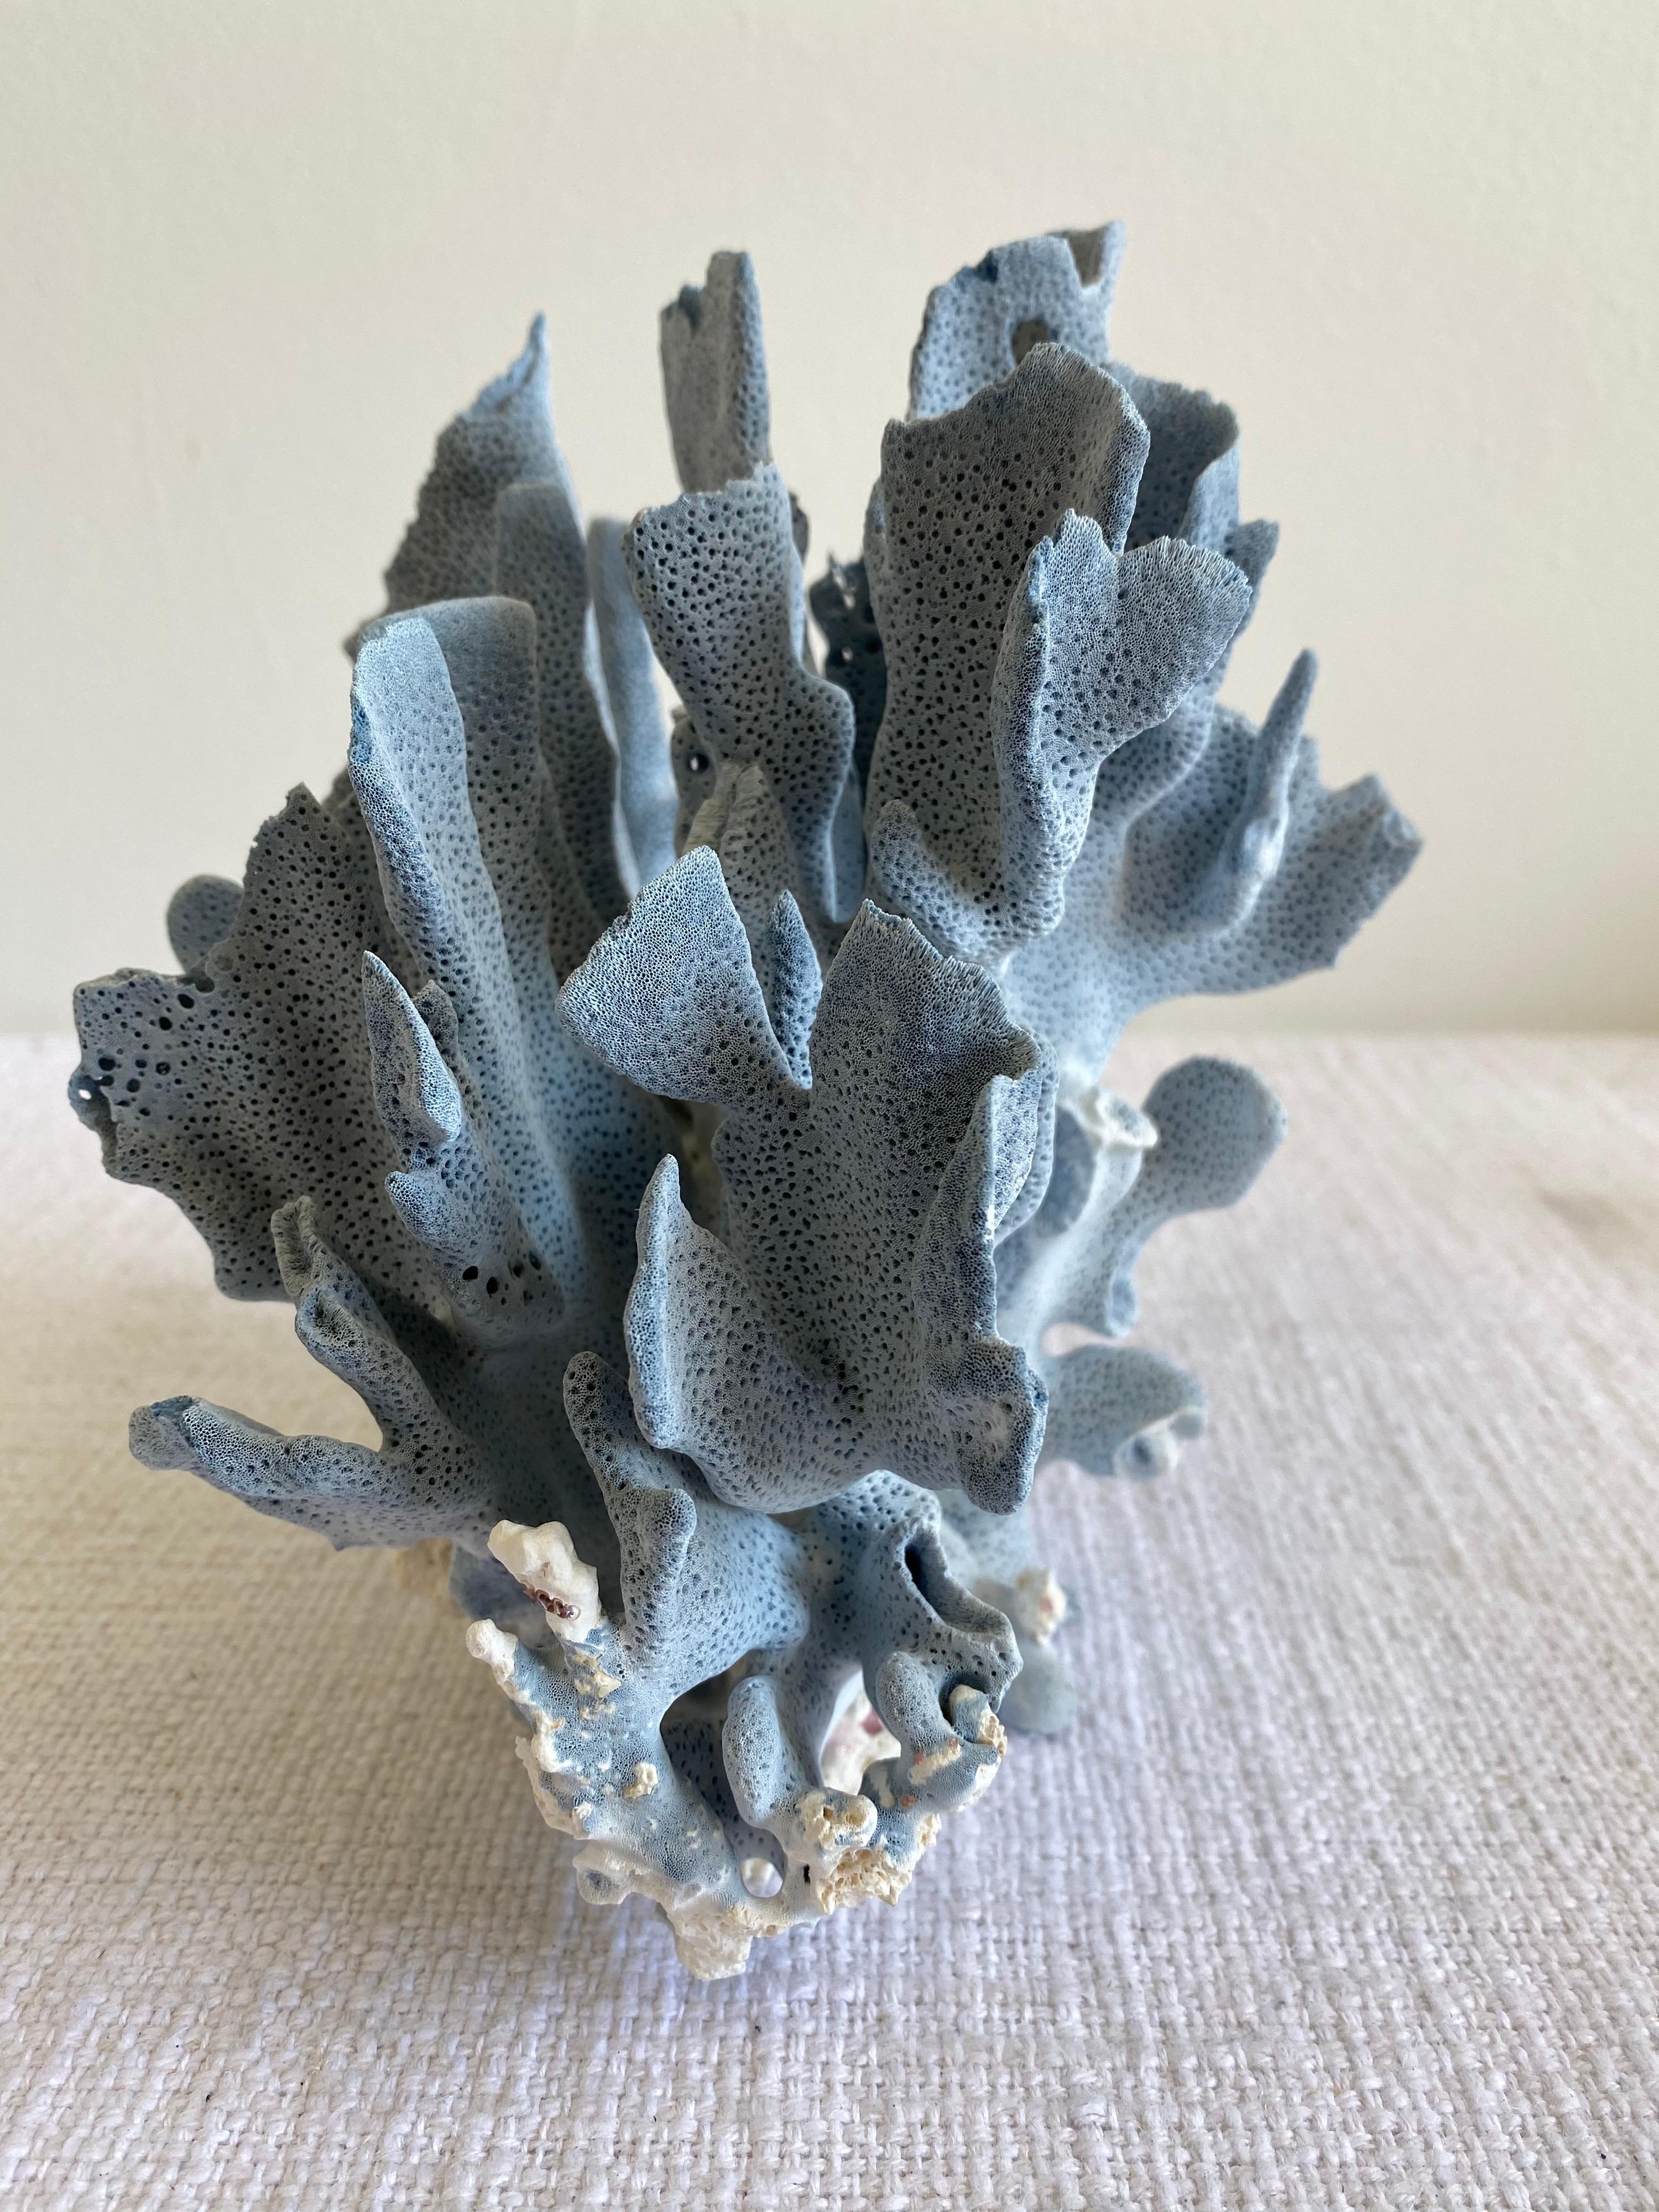 Beautiful natural colored blue coral.
This coral is real, not faux, and color is natural, not dyed.
Size: 9